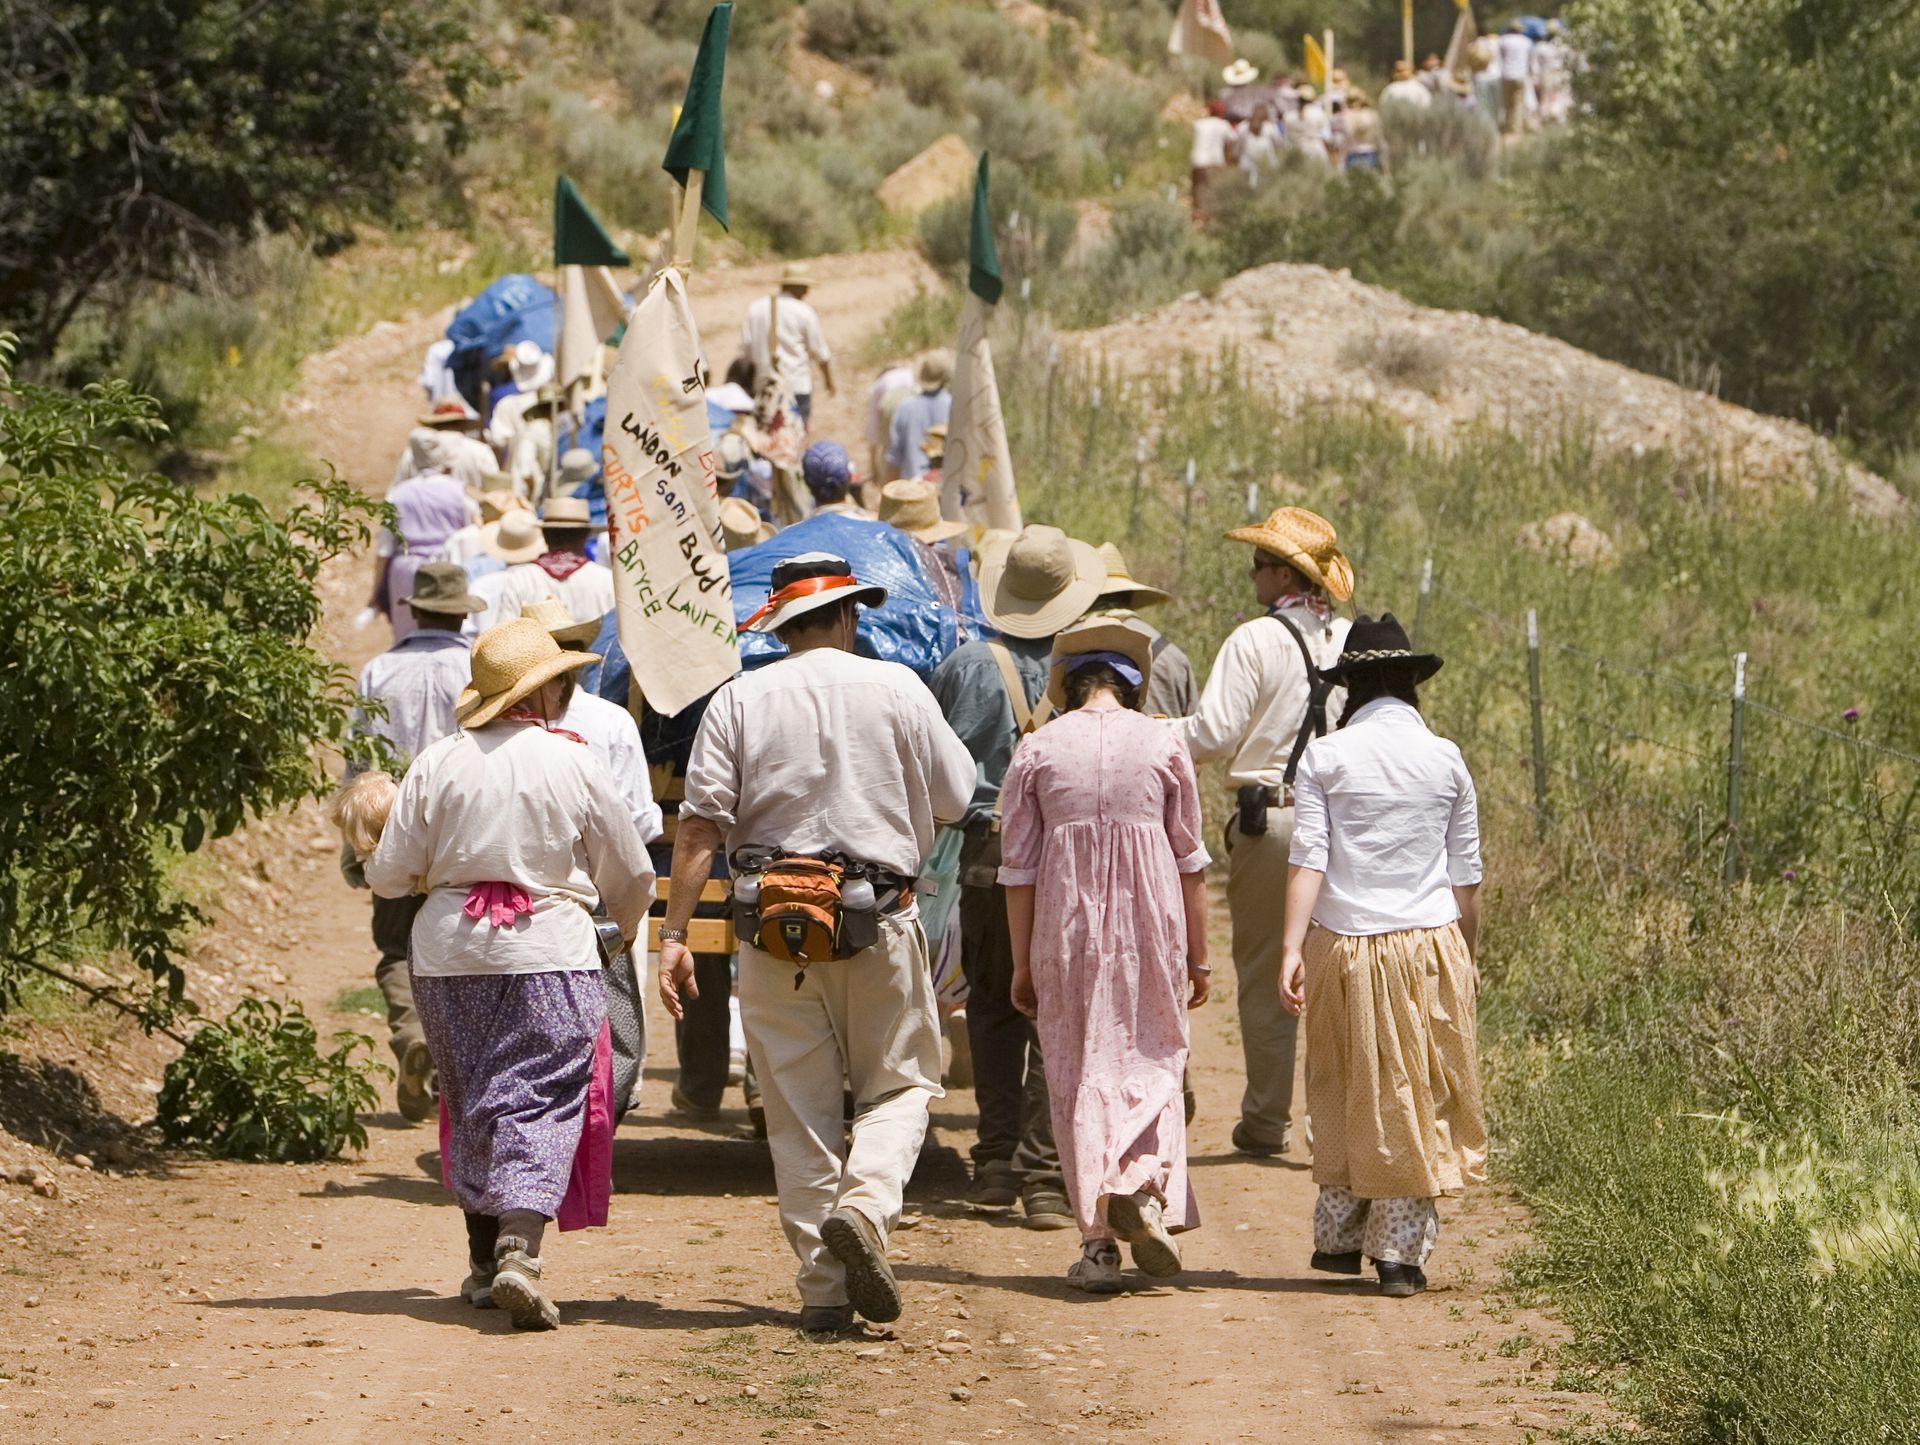 A group of men and women, all wearing hats, walk on a dirt road up a hill and pull handcarts.